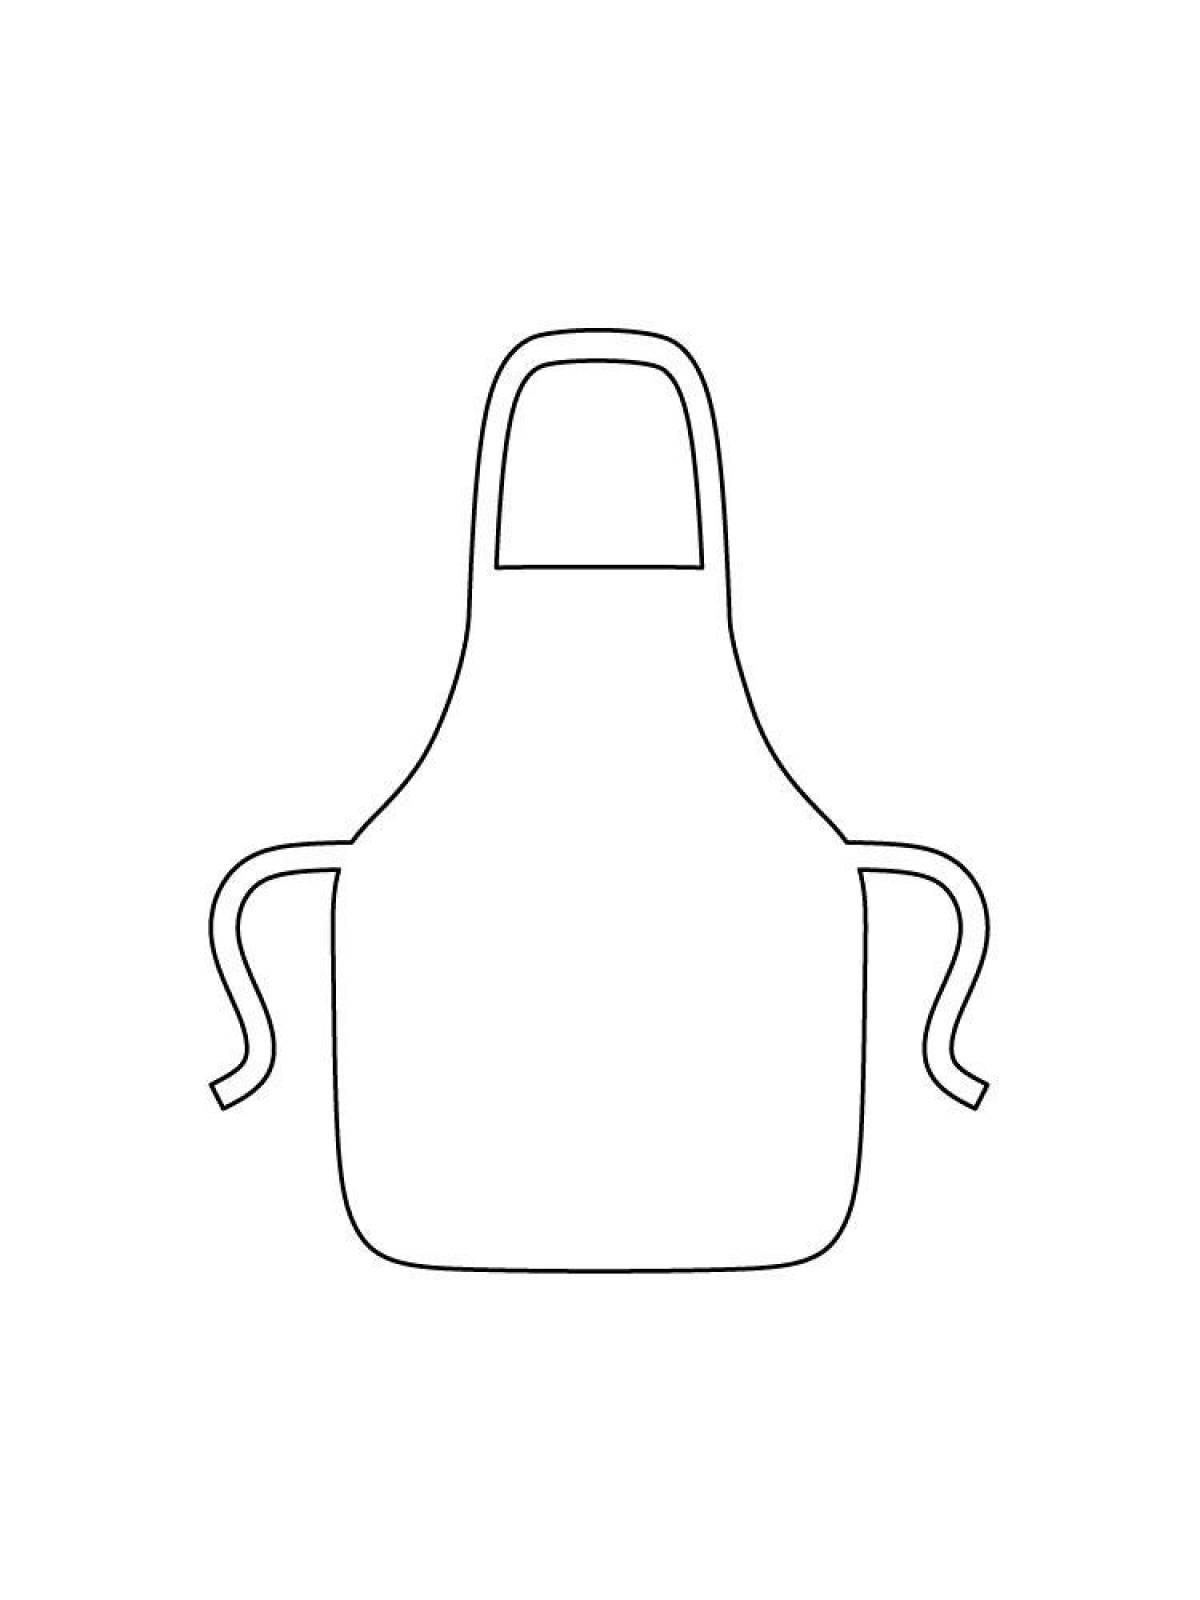 Glowing apron coloring page